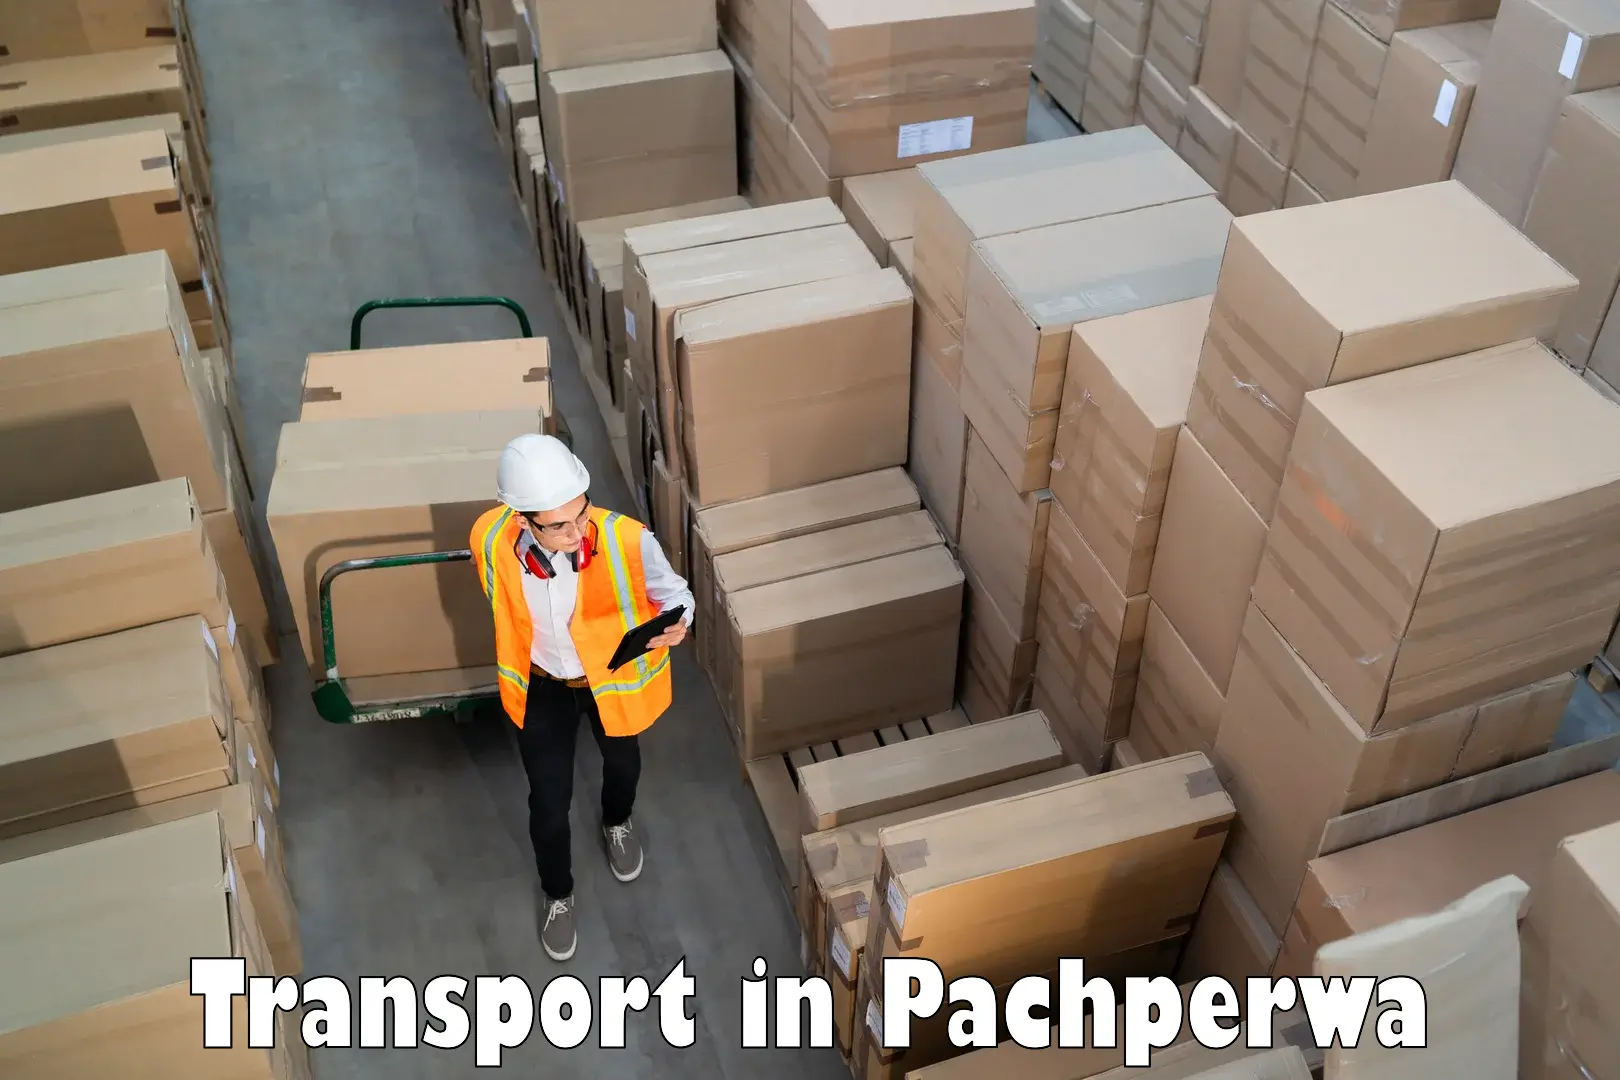 Express transport services in Pachperwa